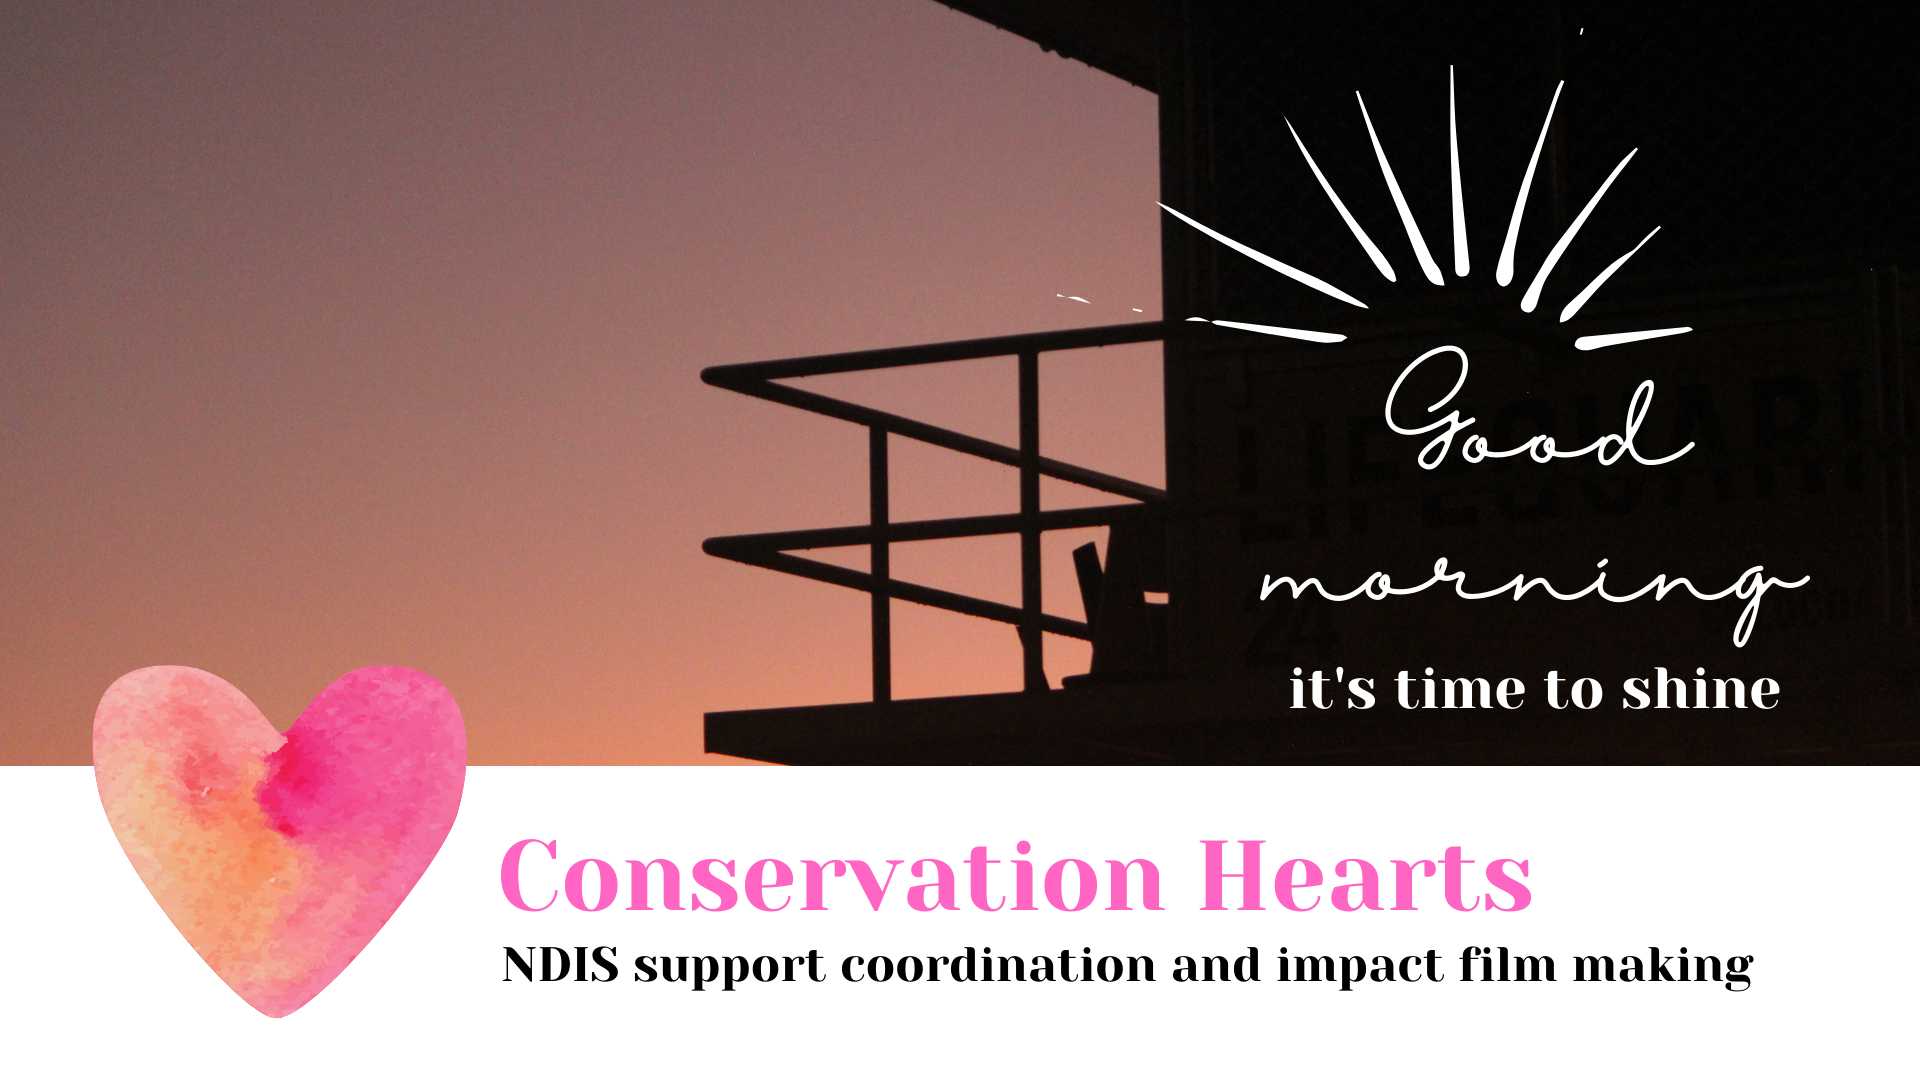 Conservation Hearts provides NDIS support coordination and impact film making.